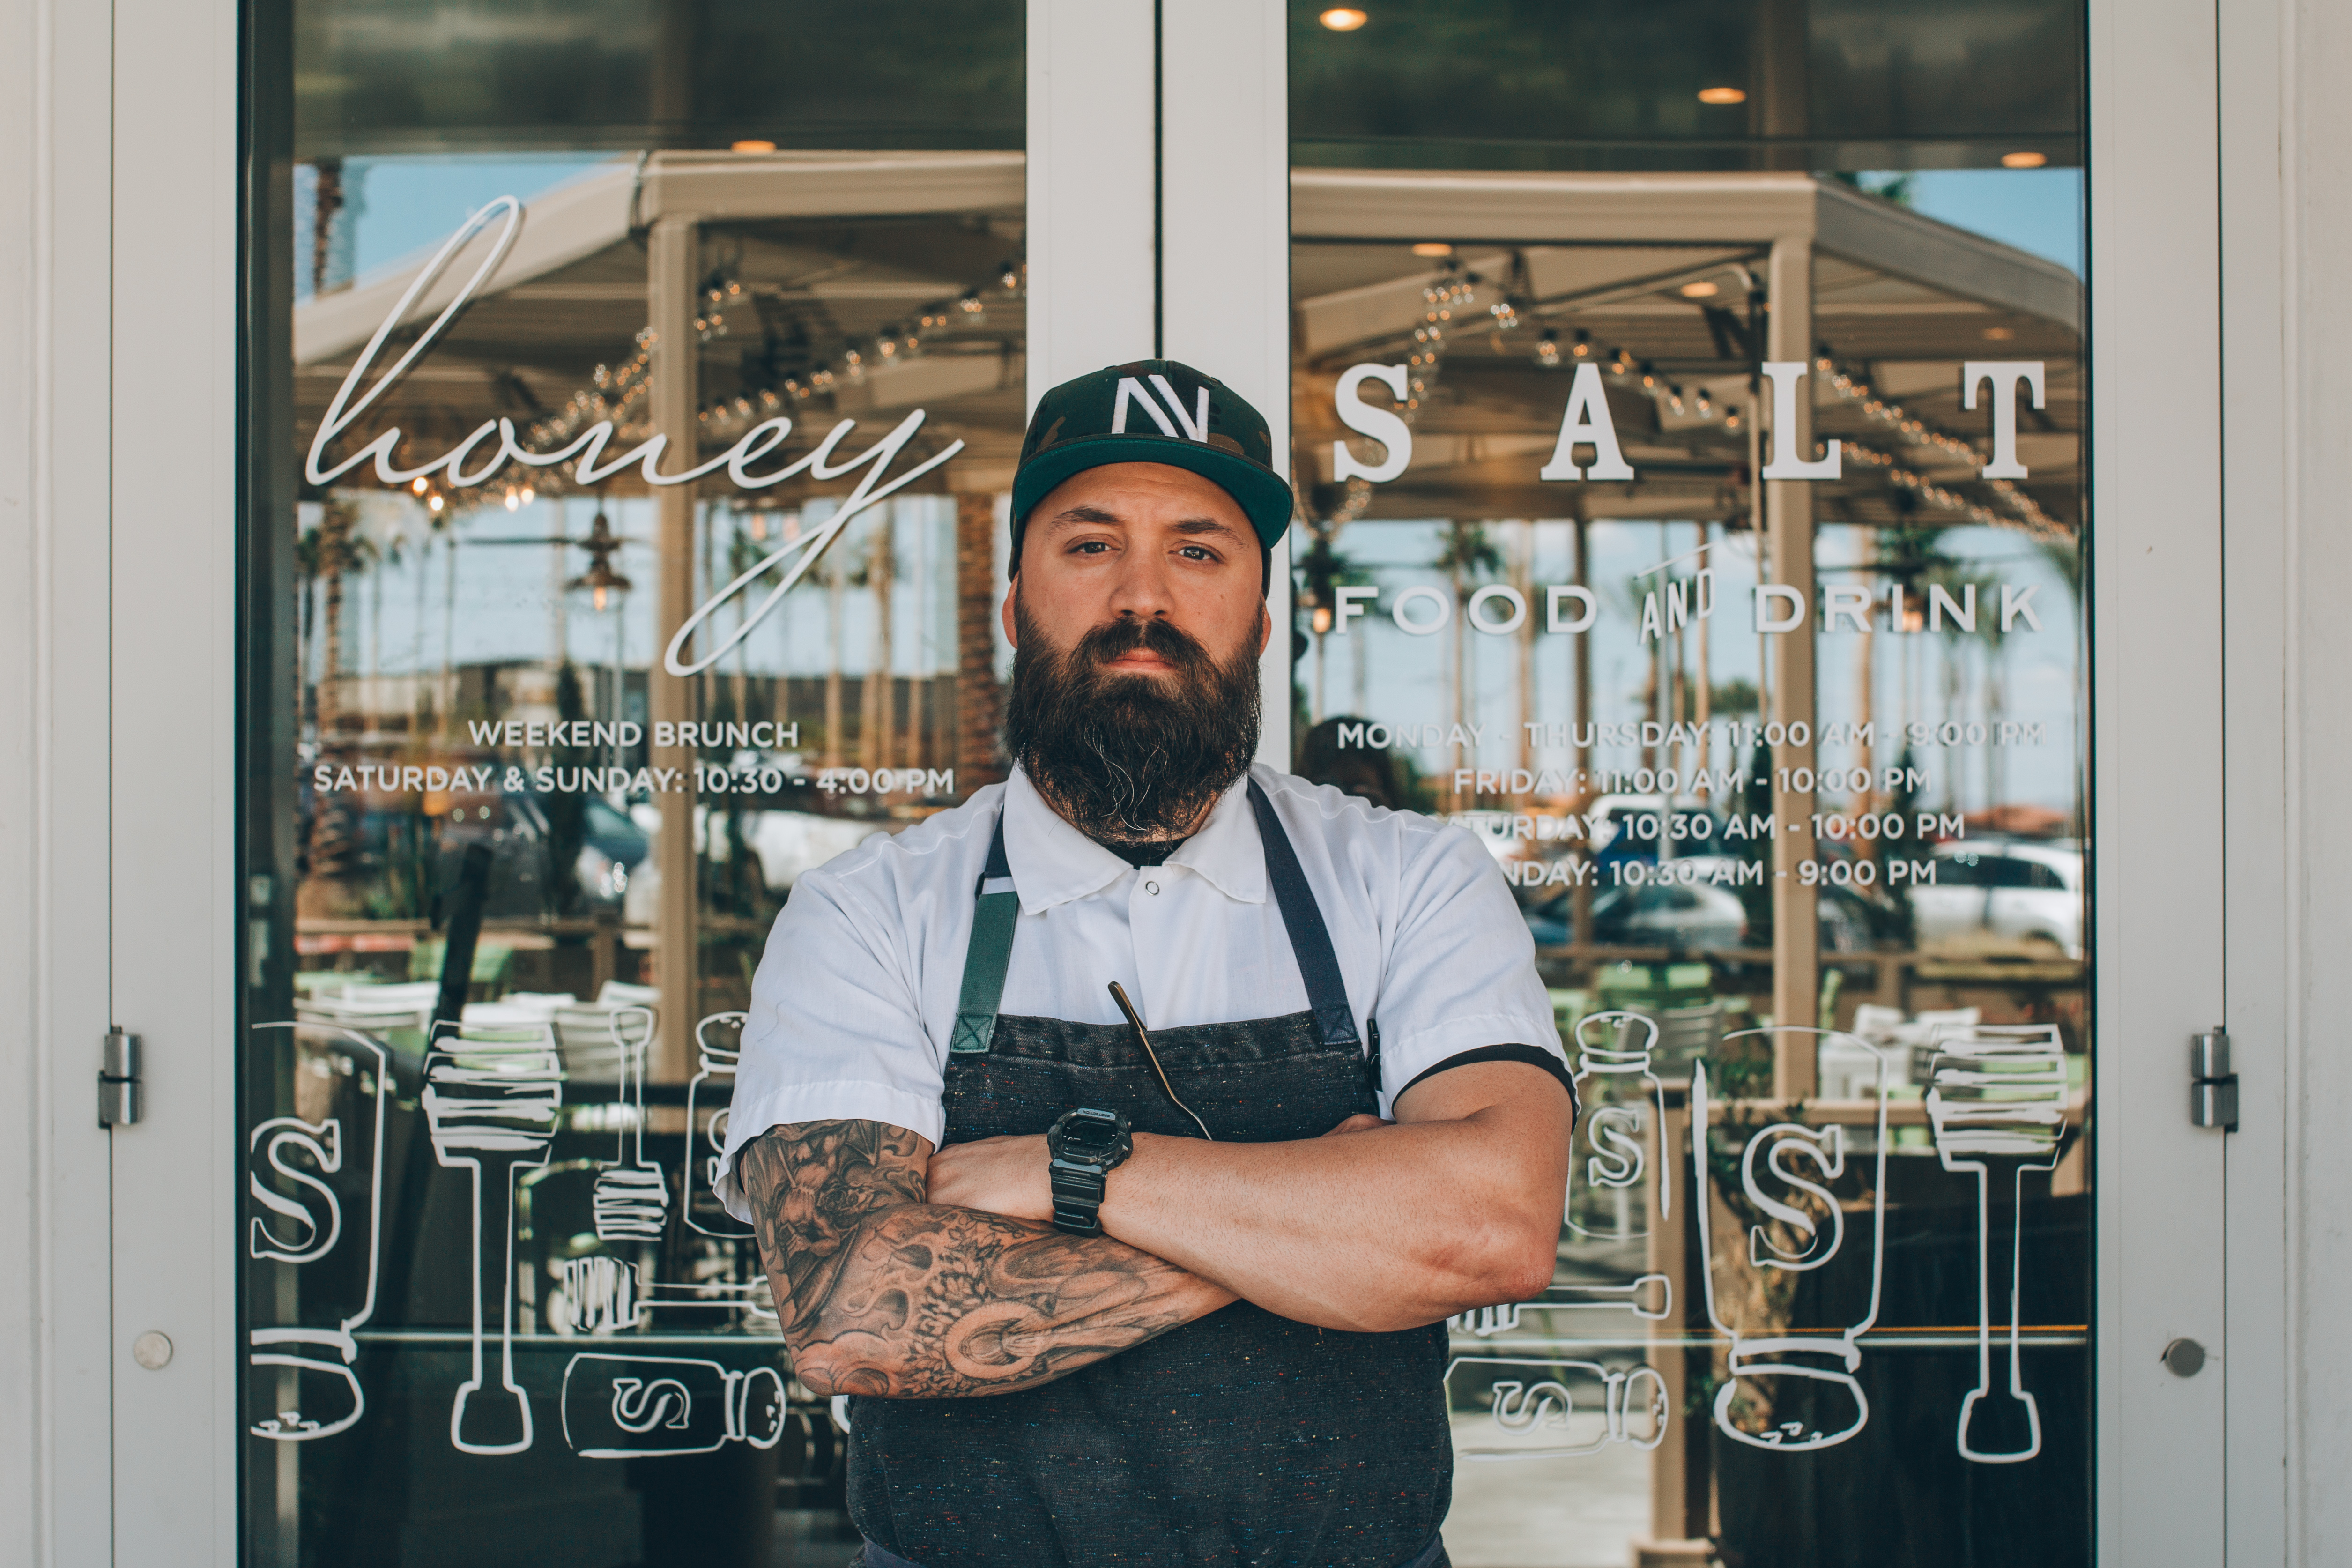 A chef stands with his arms crossed in front of a restaurant